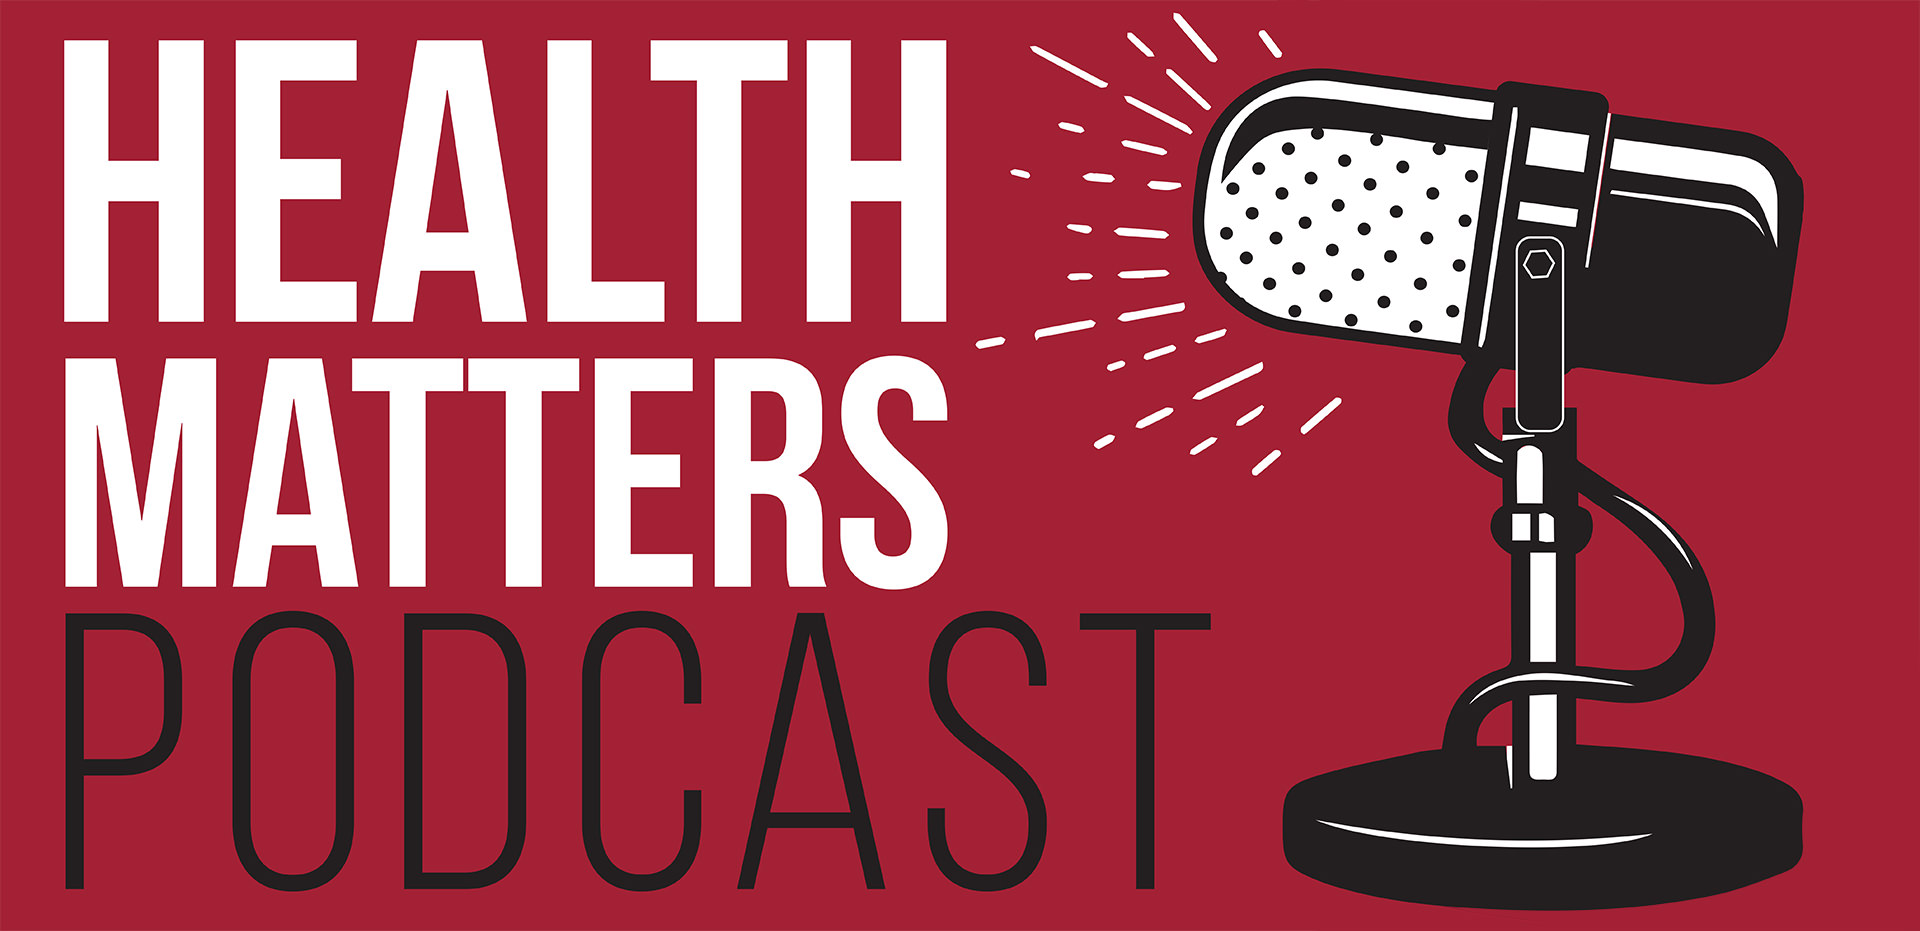 Health Matters Podcast